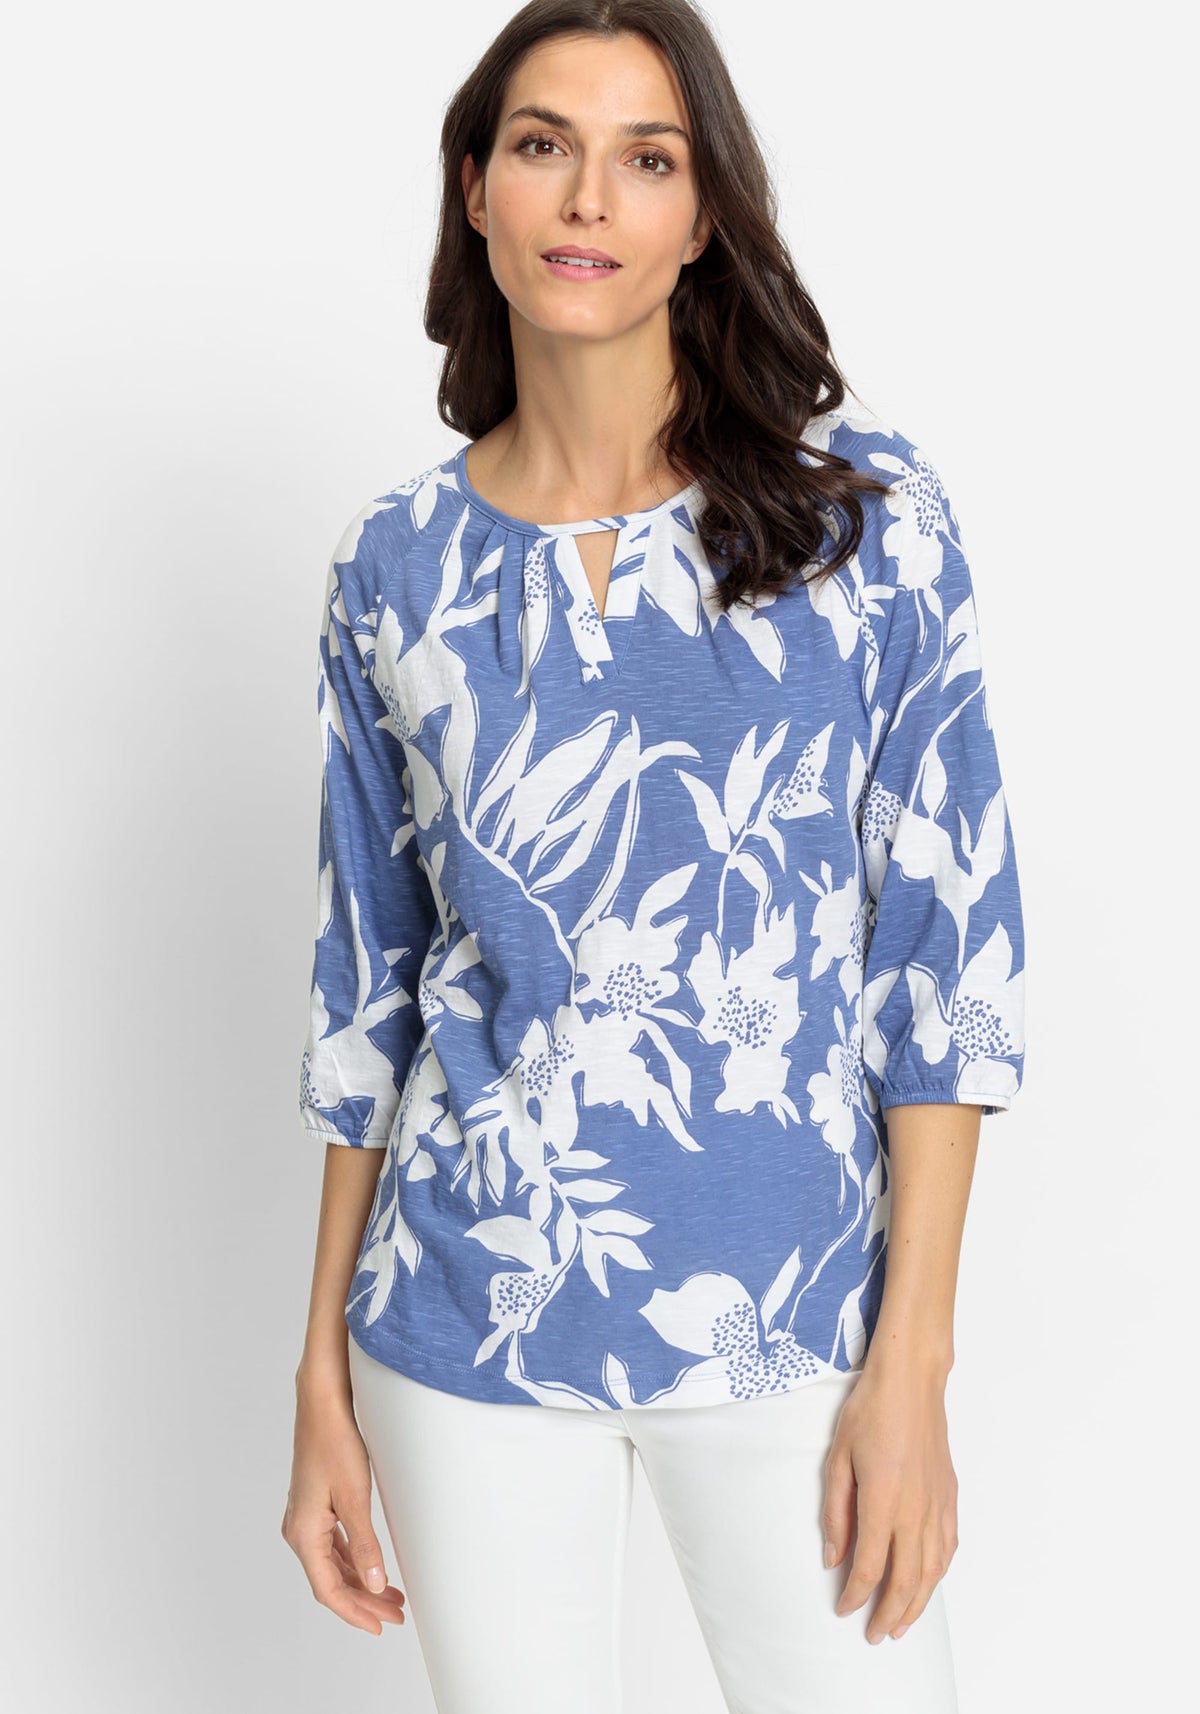 100% Organic Cotton 3/4 Sleeve Abstract Floral Print T-Shirt